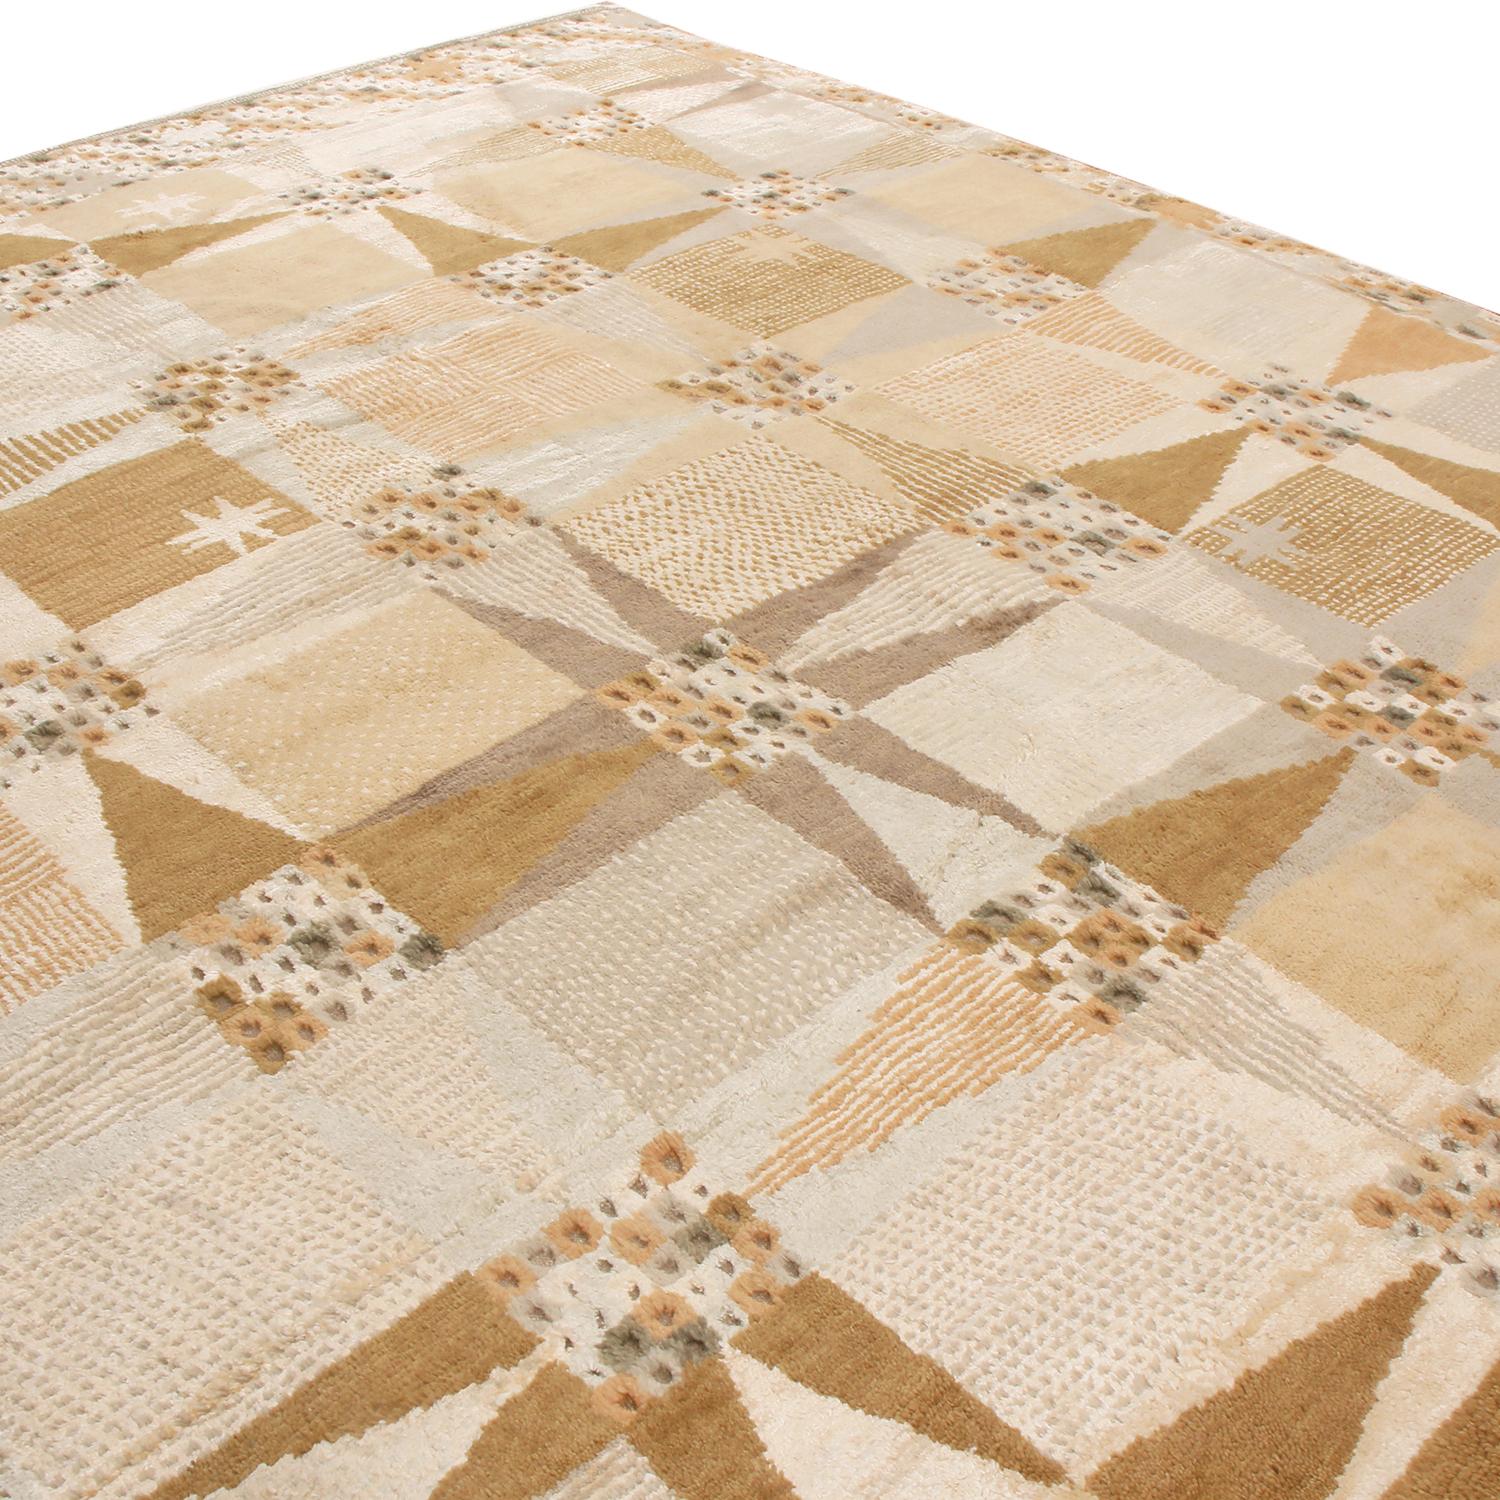 Originating from India, this hand knotted contemporary pile rug hails from Rug & Kilim’s Scandinavian-inspired collection, featuring a distinct patchwork all-over field design with cream and multi-tonal beige-brown colorways with sunset orange and